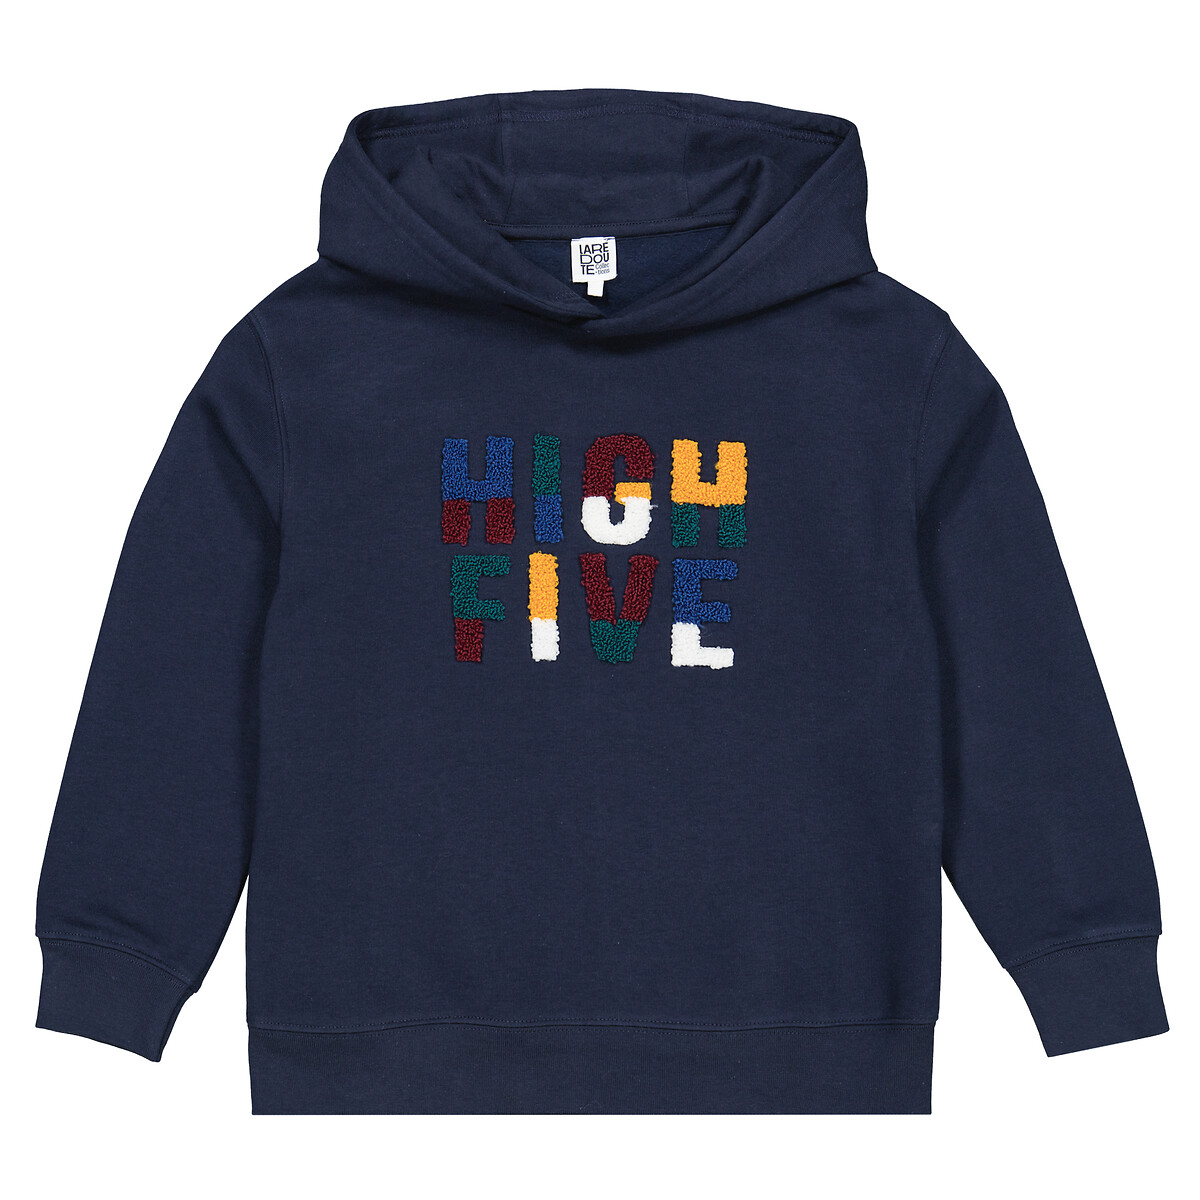 Les signatures - embroidered slogan hoodie in cotton mix, navy blue, La ...